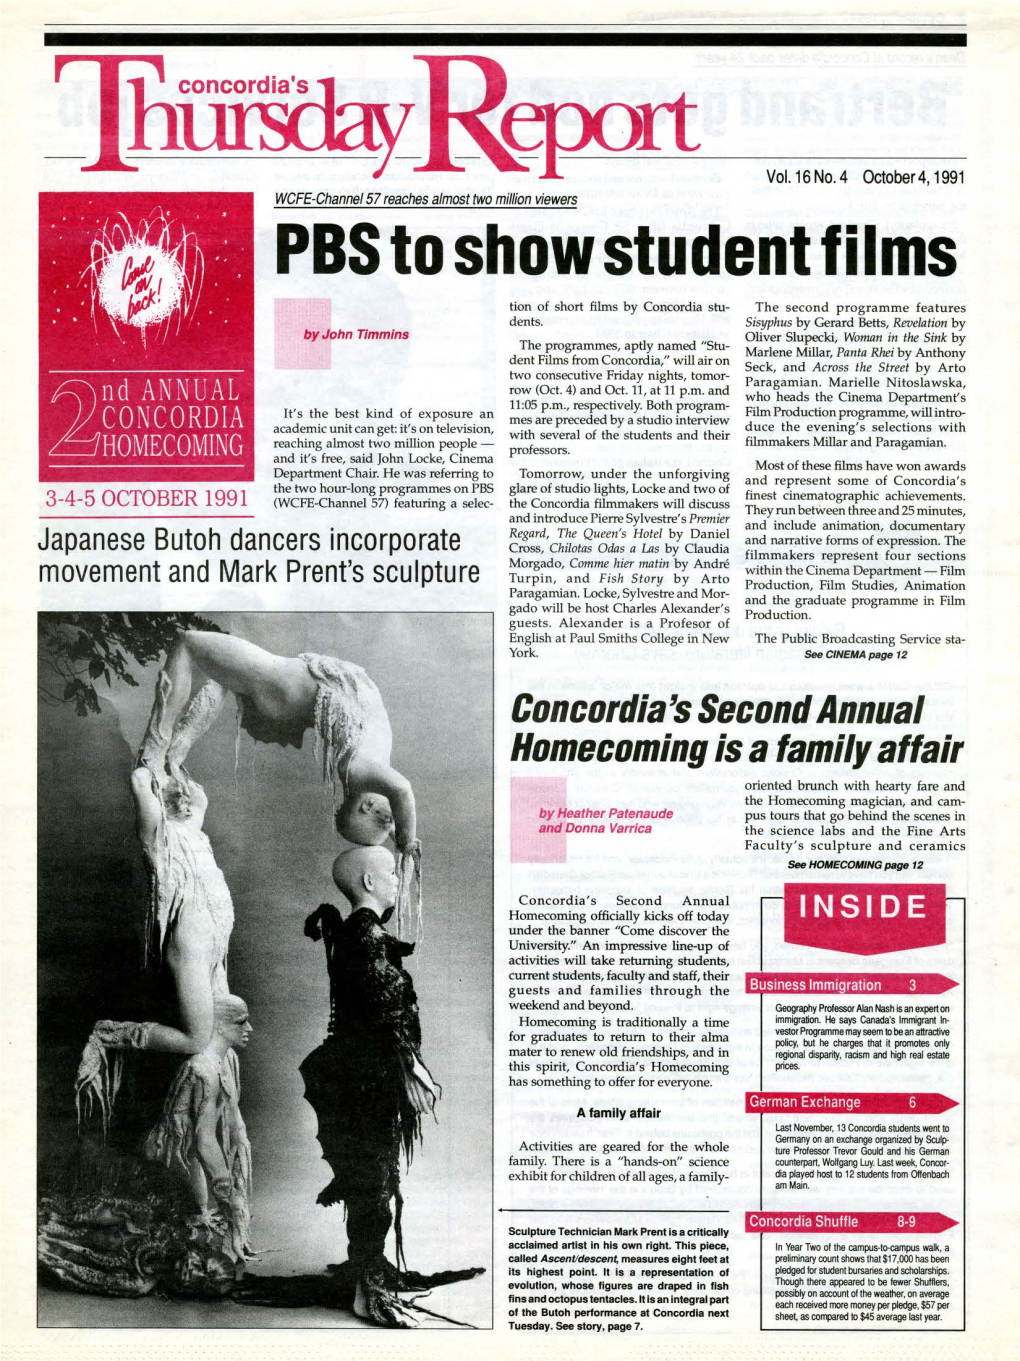 PBS to Show Student Films Tion of Short Films by Concordia Stu­ the Second Programme Features Dents